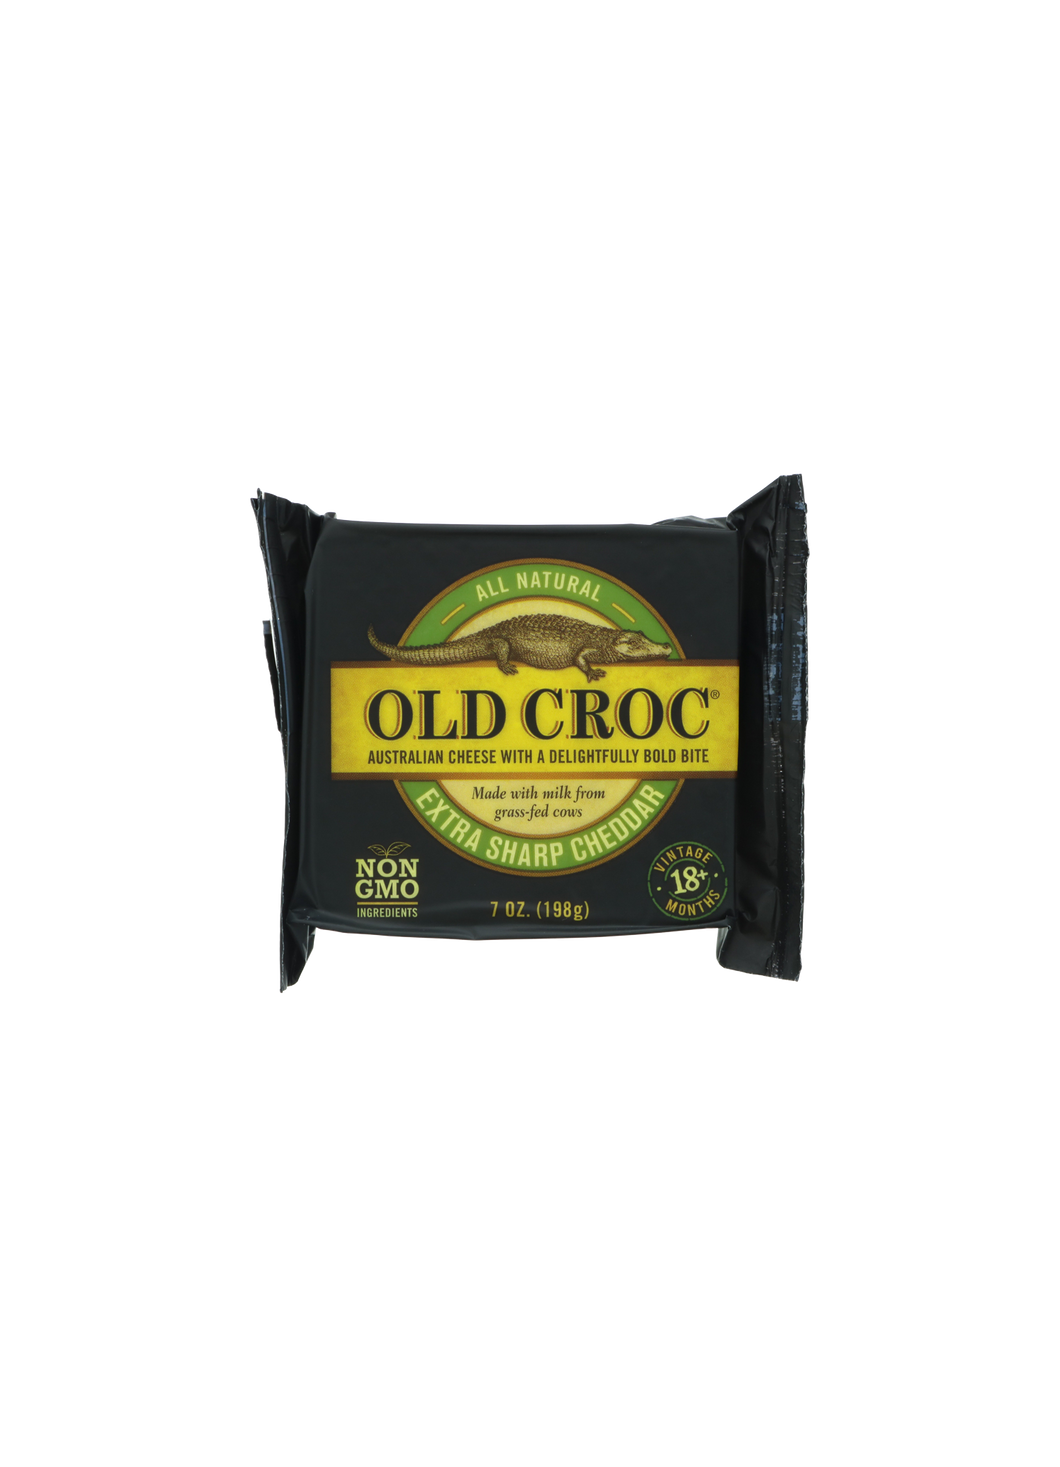 Australia Old Croc Cheese with a Delightful Bold Bite - Extra Sharp Cheddar (198g)